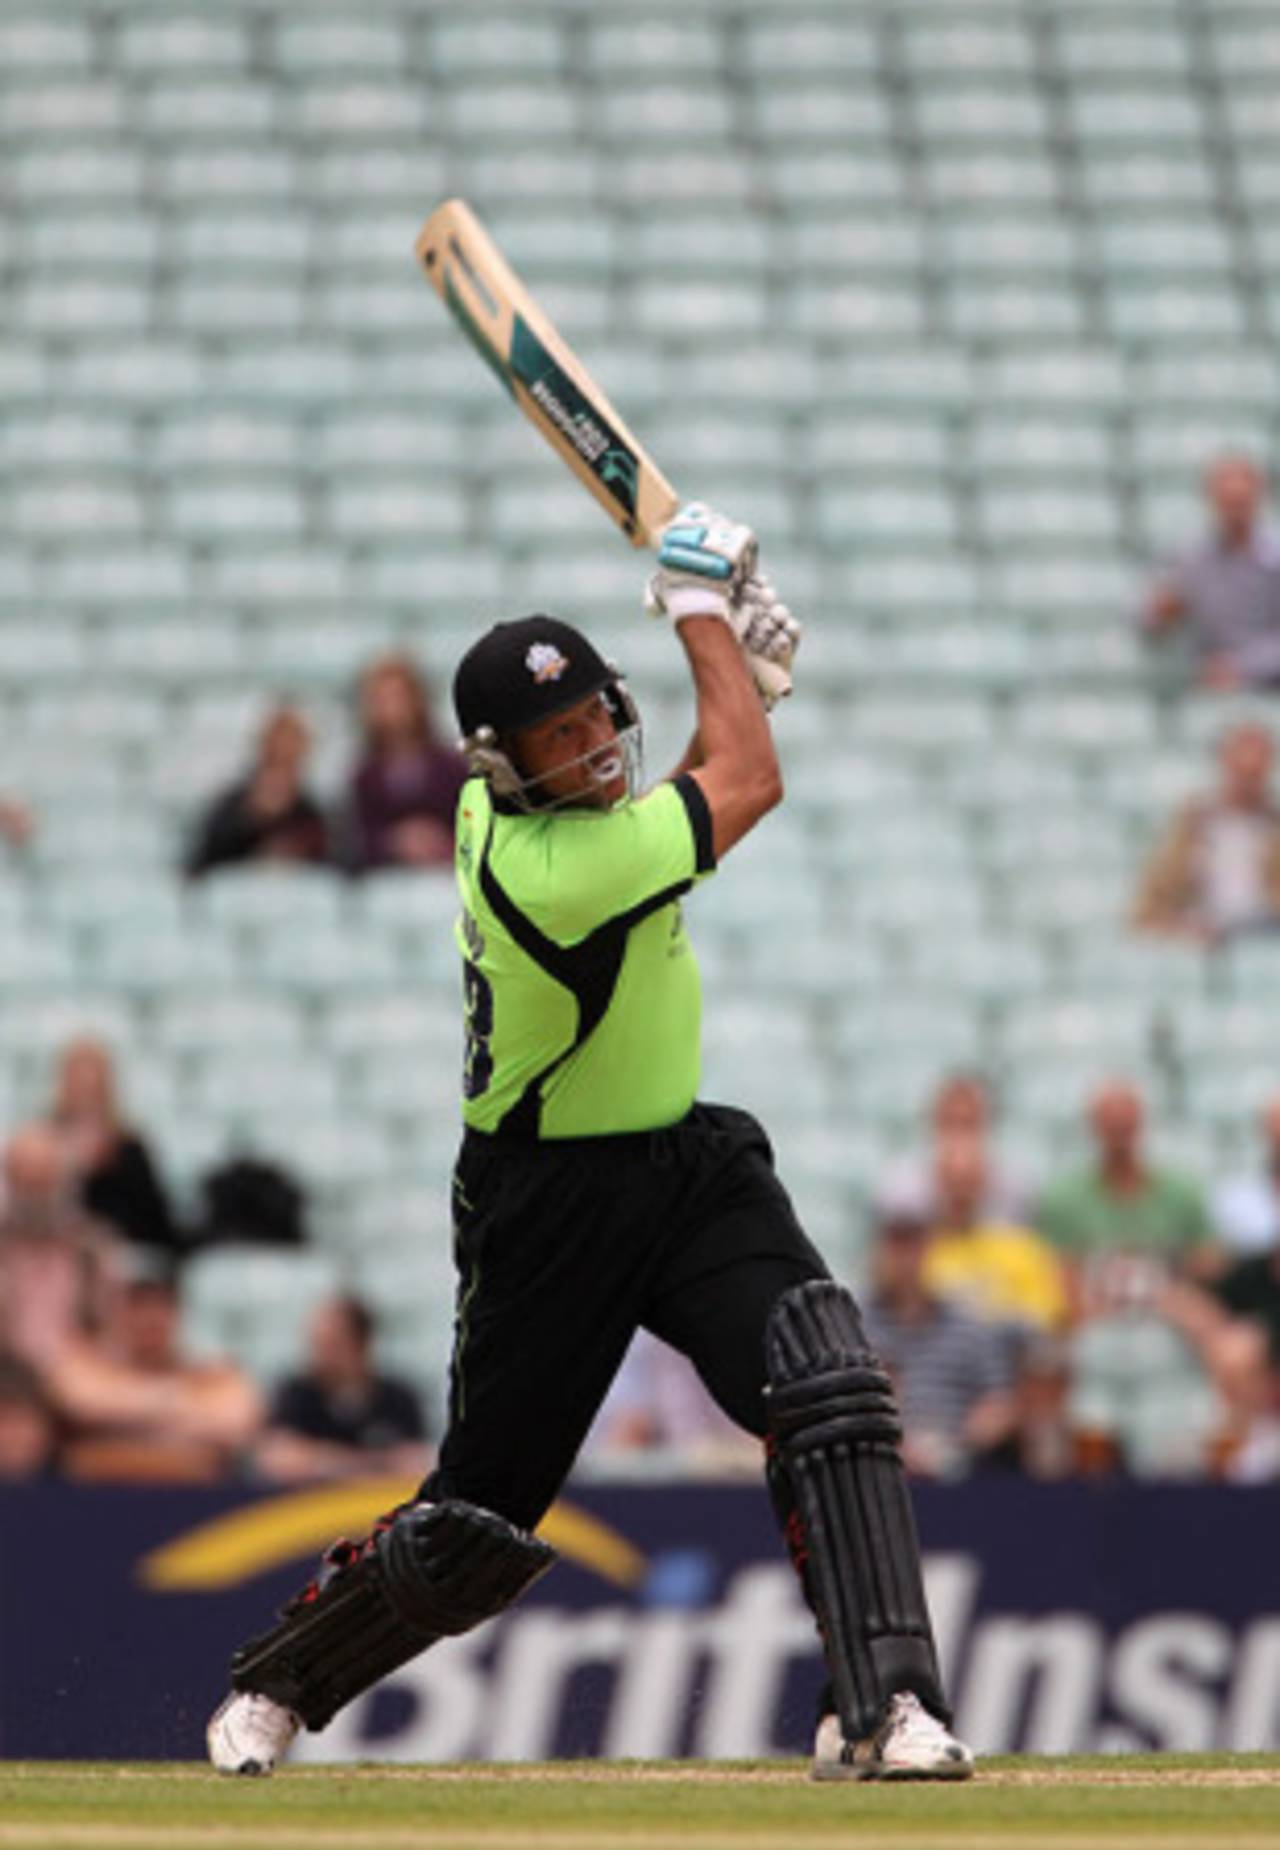 No longer the hottest ticket in town -  Andrew Symonds batting at The Oval against a backdrop of empty seats&nbsp;&nbsp;&bull;&nbsp;&nbsp;Getty Images